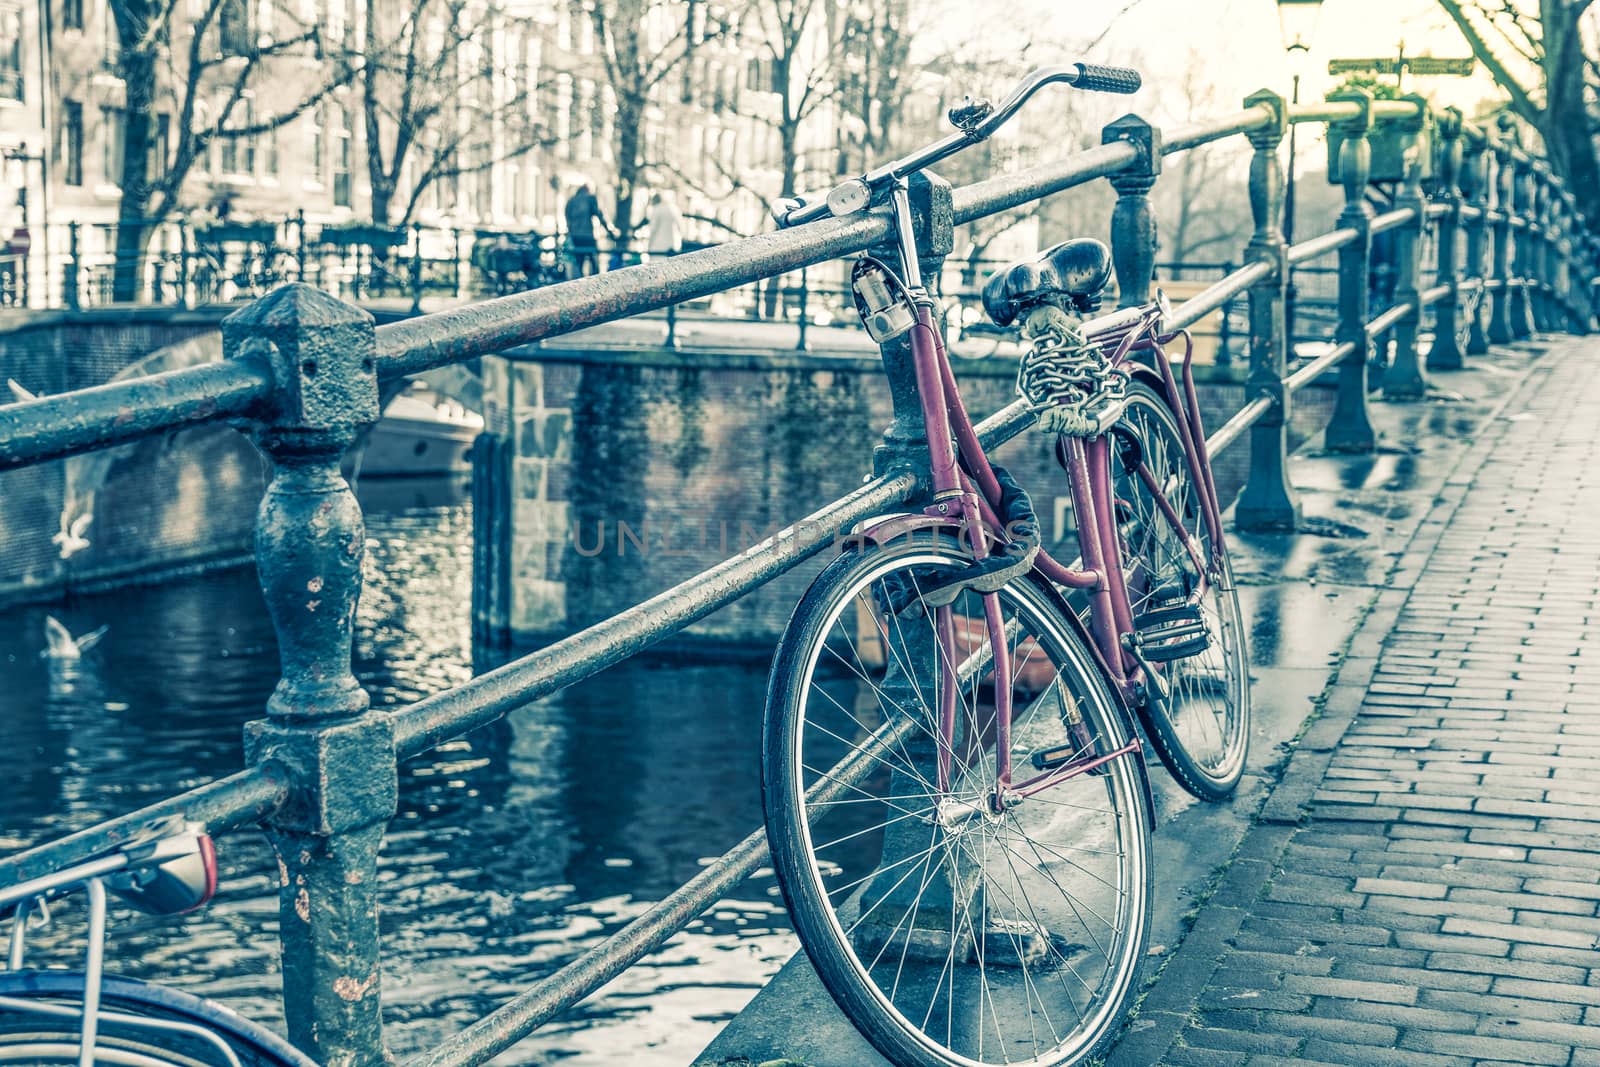 Amsterdam canal and bicycles by gianliguori